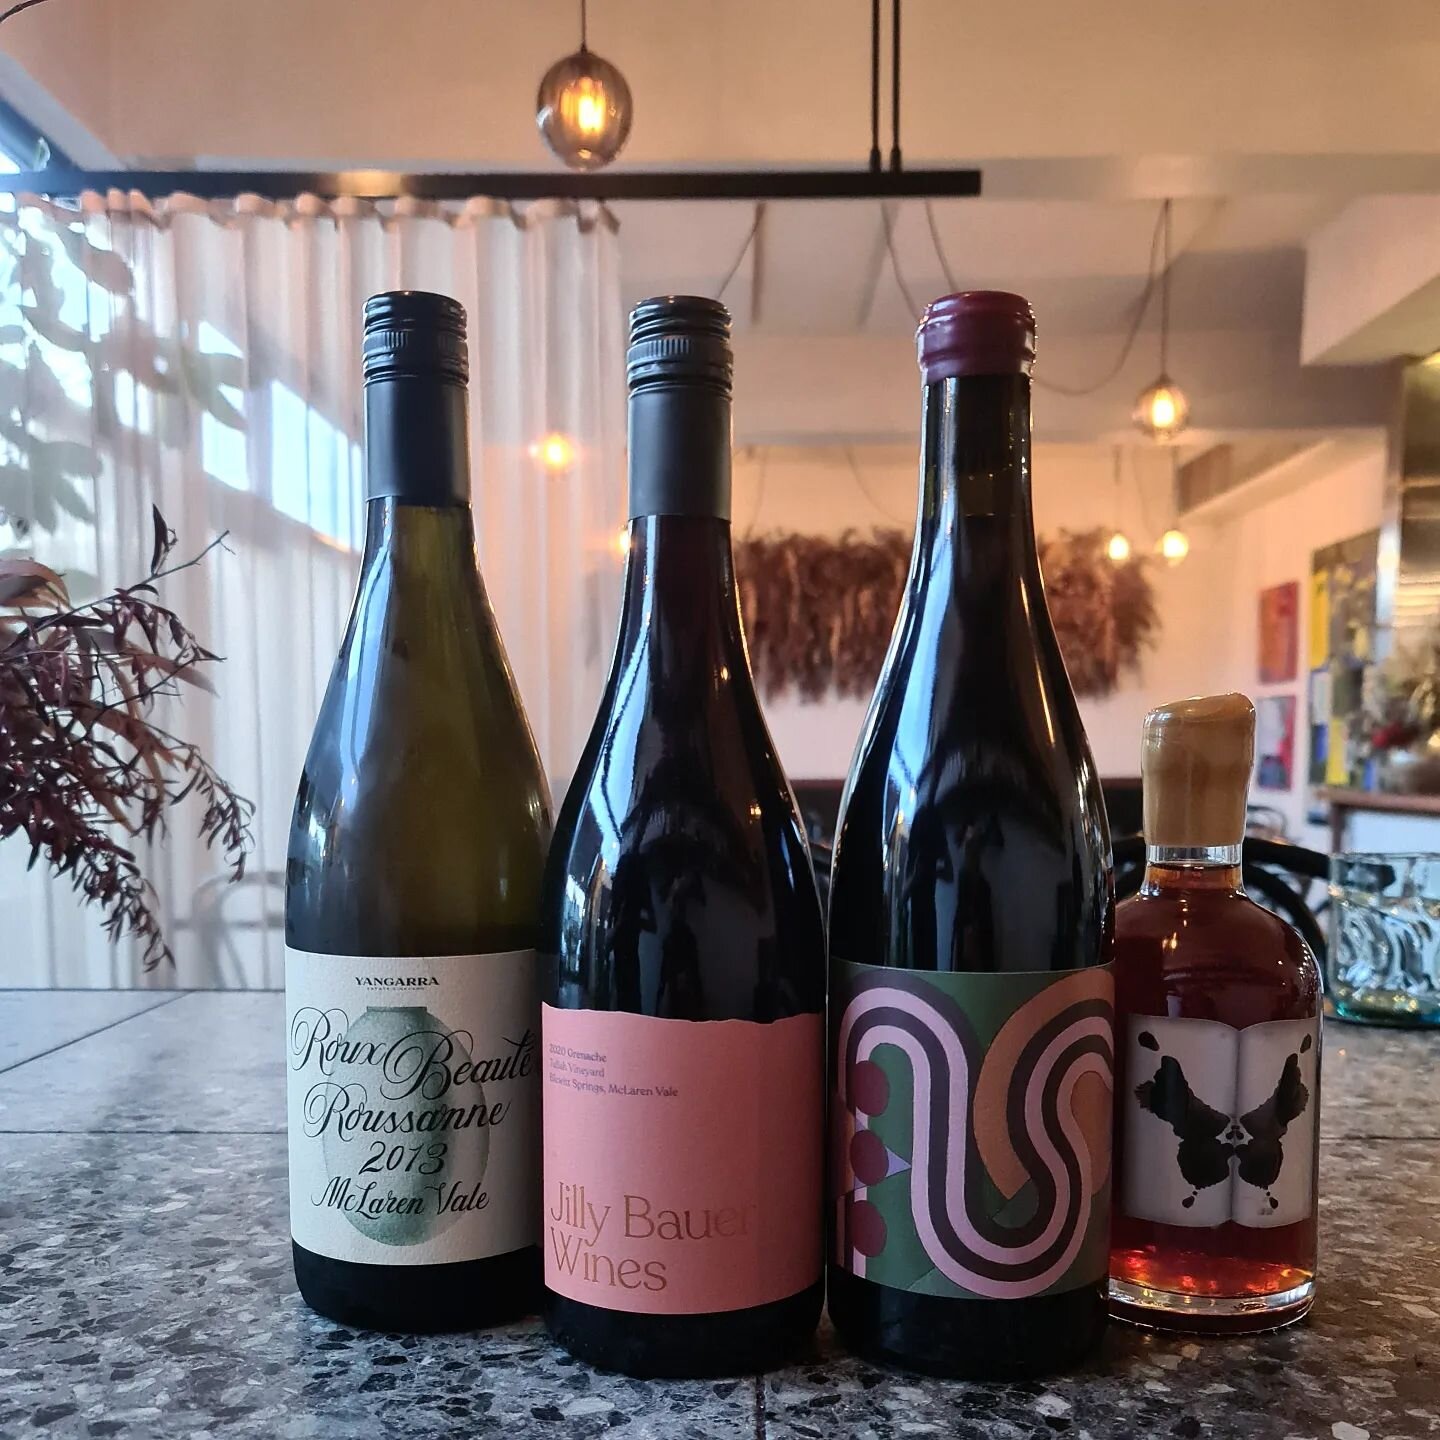 A few small-batch stunners from South Australia in the building. Community, care, and a whole lot of place in every glass, on the pour and the pair all this week.

#pilotresto #womeninwine #grenacheiscoolok